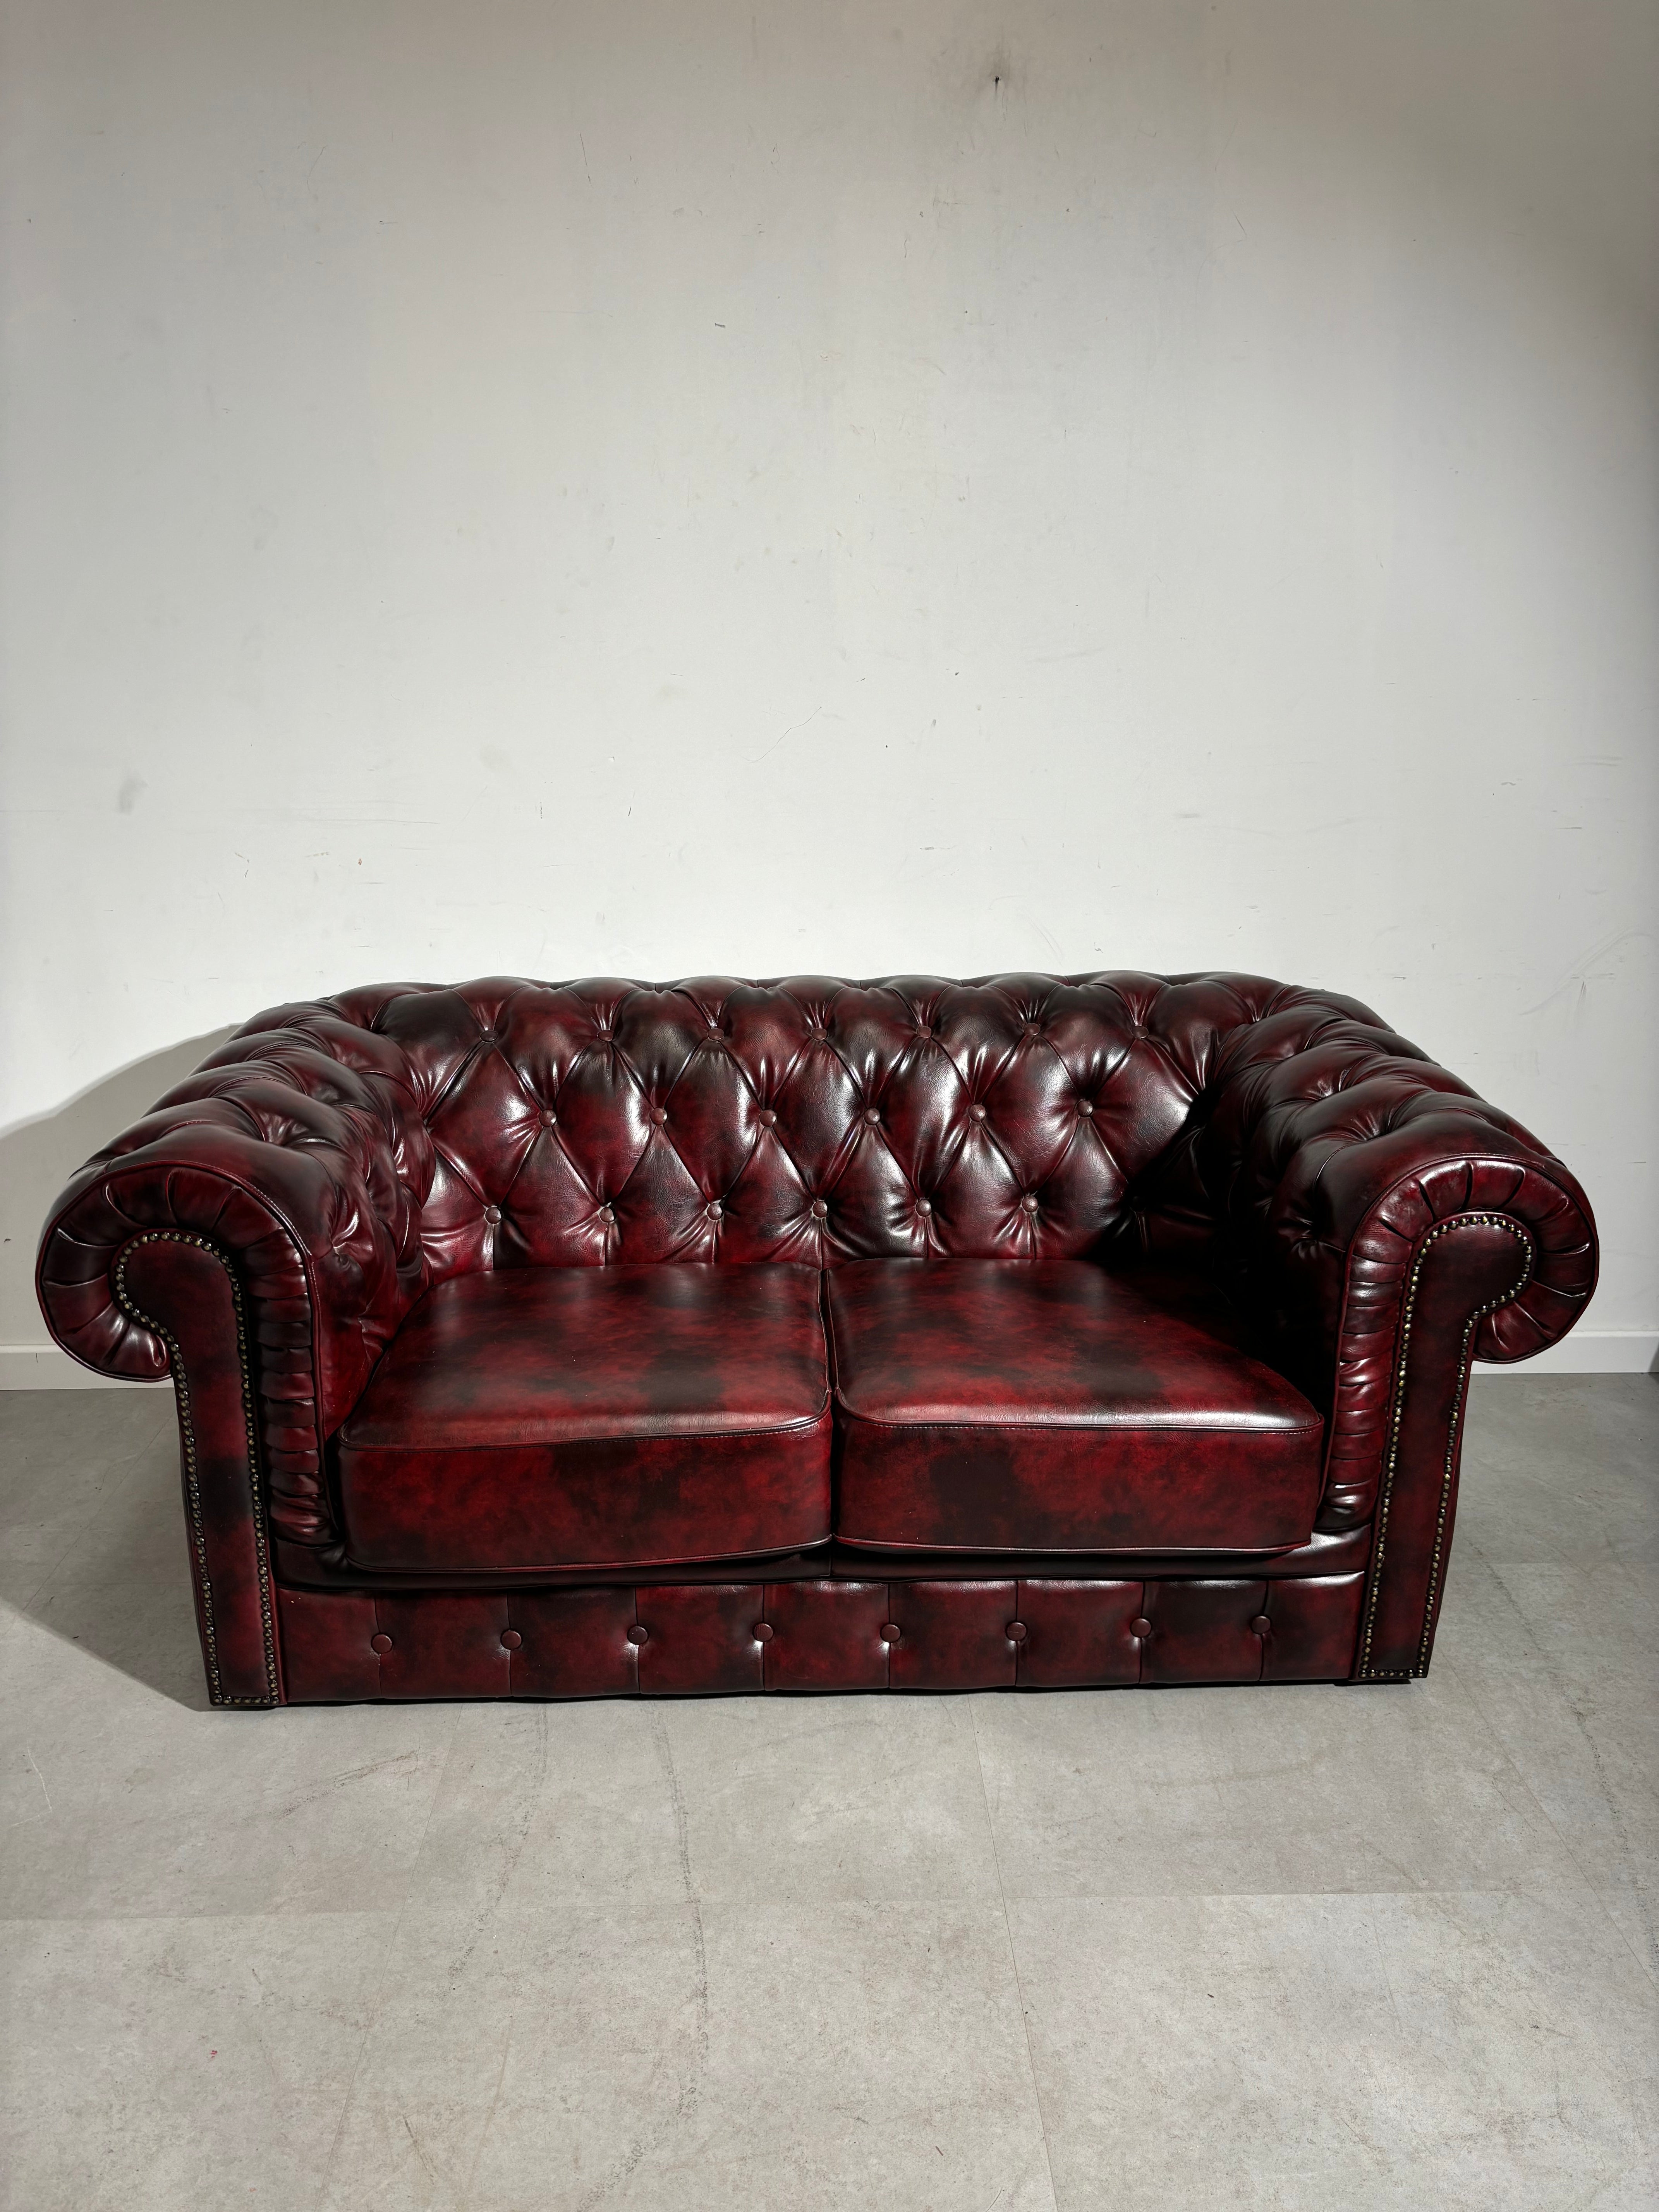 Chesterfield two seater